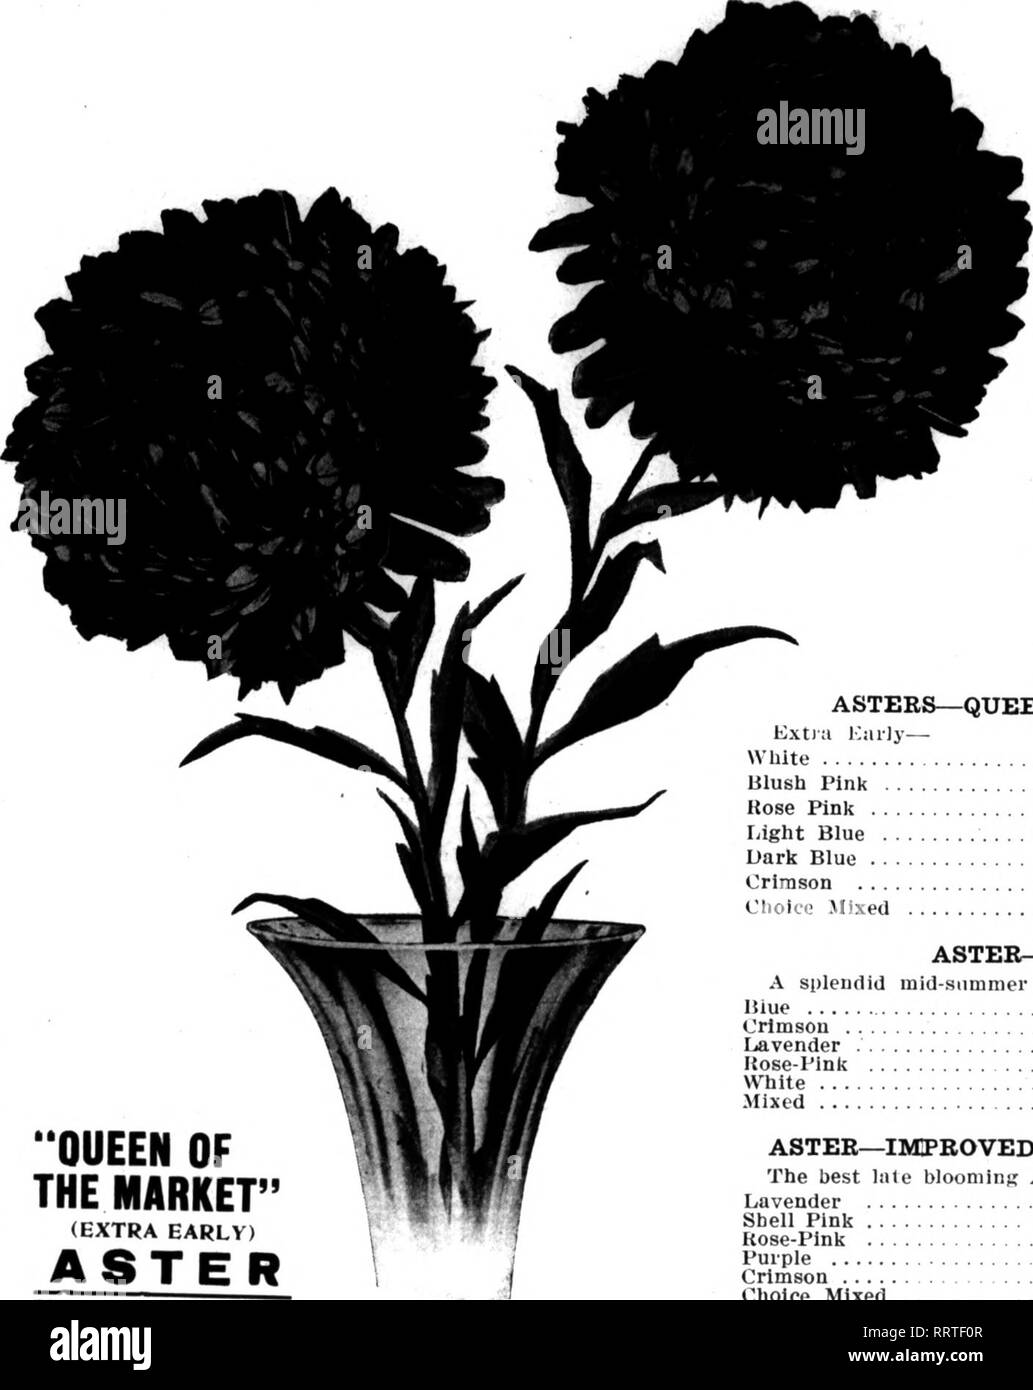 . Florists' review [microform]. Floriculture. FSBKUARV 26, 1914. The Florists' Review 35. Place Your Order NOW QUEEN OF THE MARKET&quot; (EXTRA EARLV) ASTER , ASPAEAGUS PLUMOSUS NANUS New crop greenhouse grown. 100 Seeds $0.50 500 Seeds 1.75 1,000 Seeds 3.25 5,000 Seeds 15.00 JO.OOO Seeds 29.00 Special prices on larger quantities. ASPARAGUS HATCHEBI 100 Seeds 1.00 250 Seeds 2 00 500 Seeds • 3.25 1,000 Seeds 6.00 ALYSSUM Tr. Pkt. Oz. Little (Jem ifO.lO |0.40 CANDYTUFT Michells (Jiant White 15 .:?5 CENTAUREA Gymnociirpa 15 .40 COBAEA SCANDENS Purple 10 .40 White 25 .75 IPOMOEA NOCTIFLORA Moonflo Stock Photo